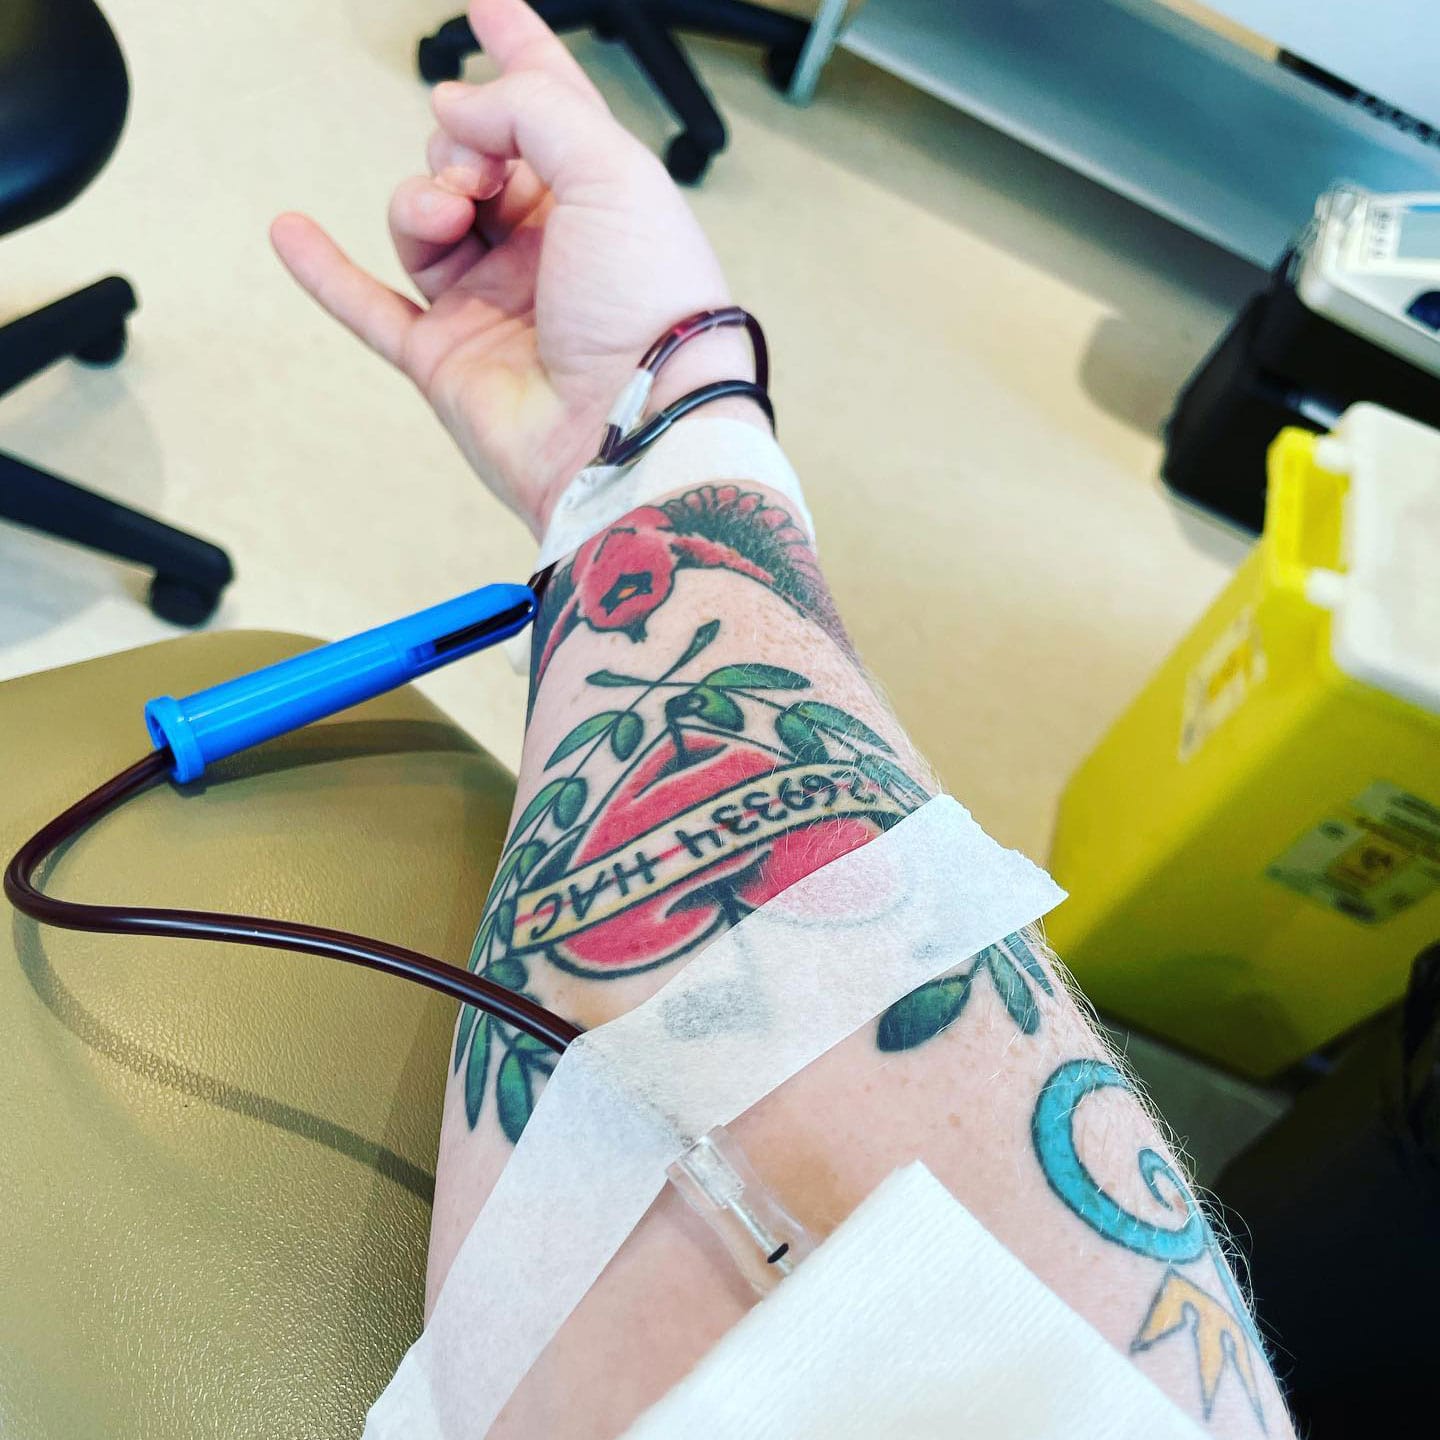 Arm with tattoos giving blood donation